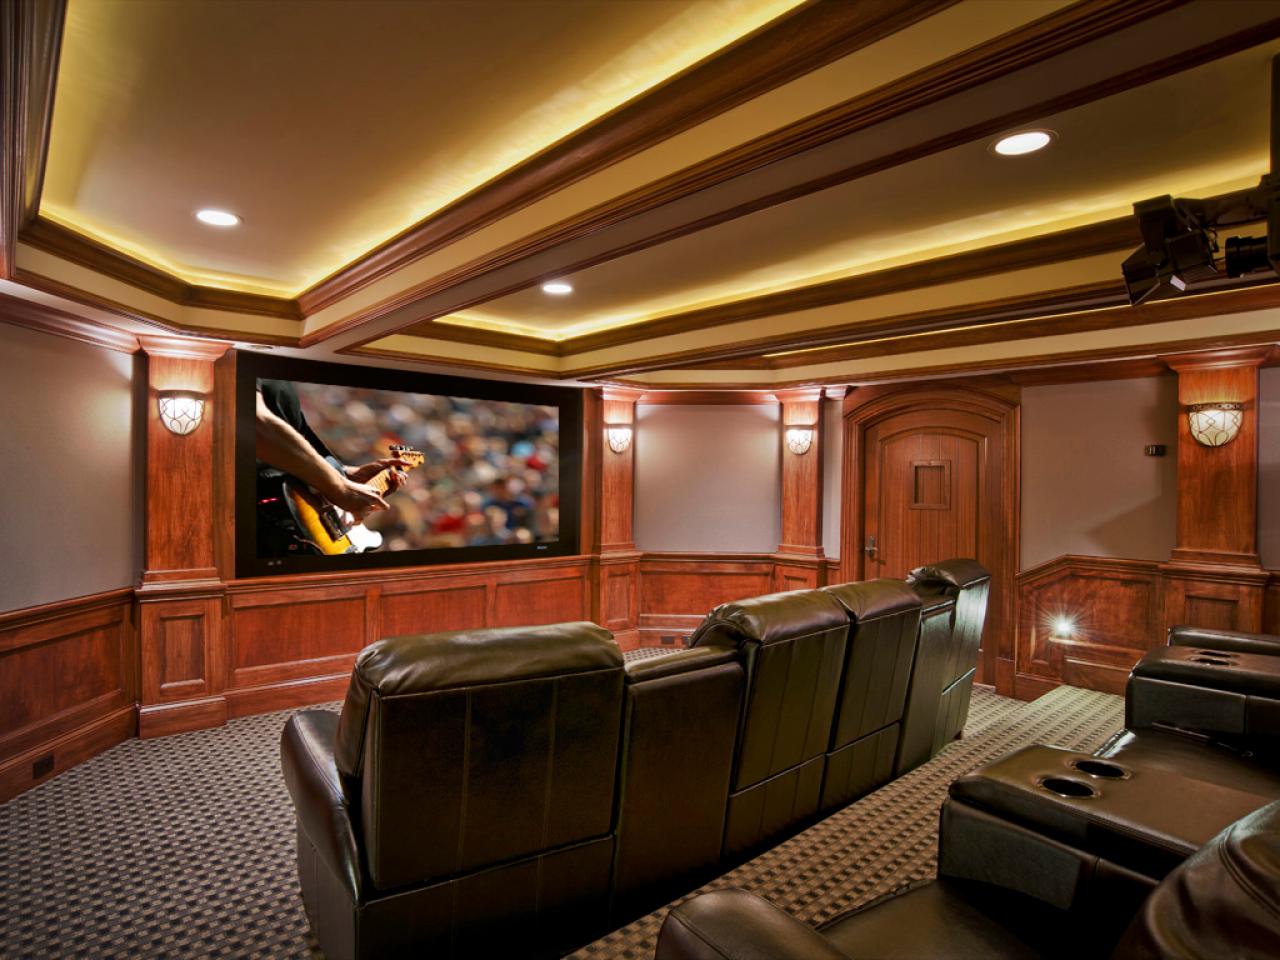 Basement Home Theaters And Media Rooms Pictures Tips Ideas Hgtv